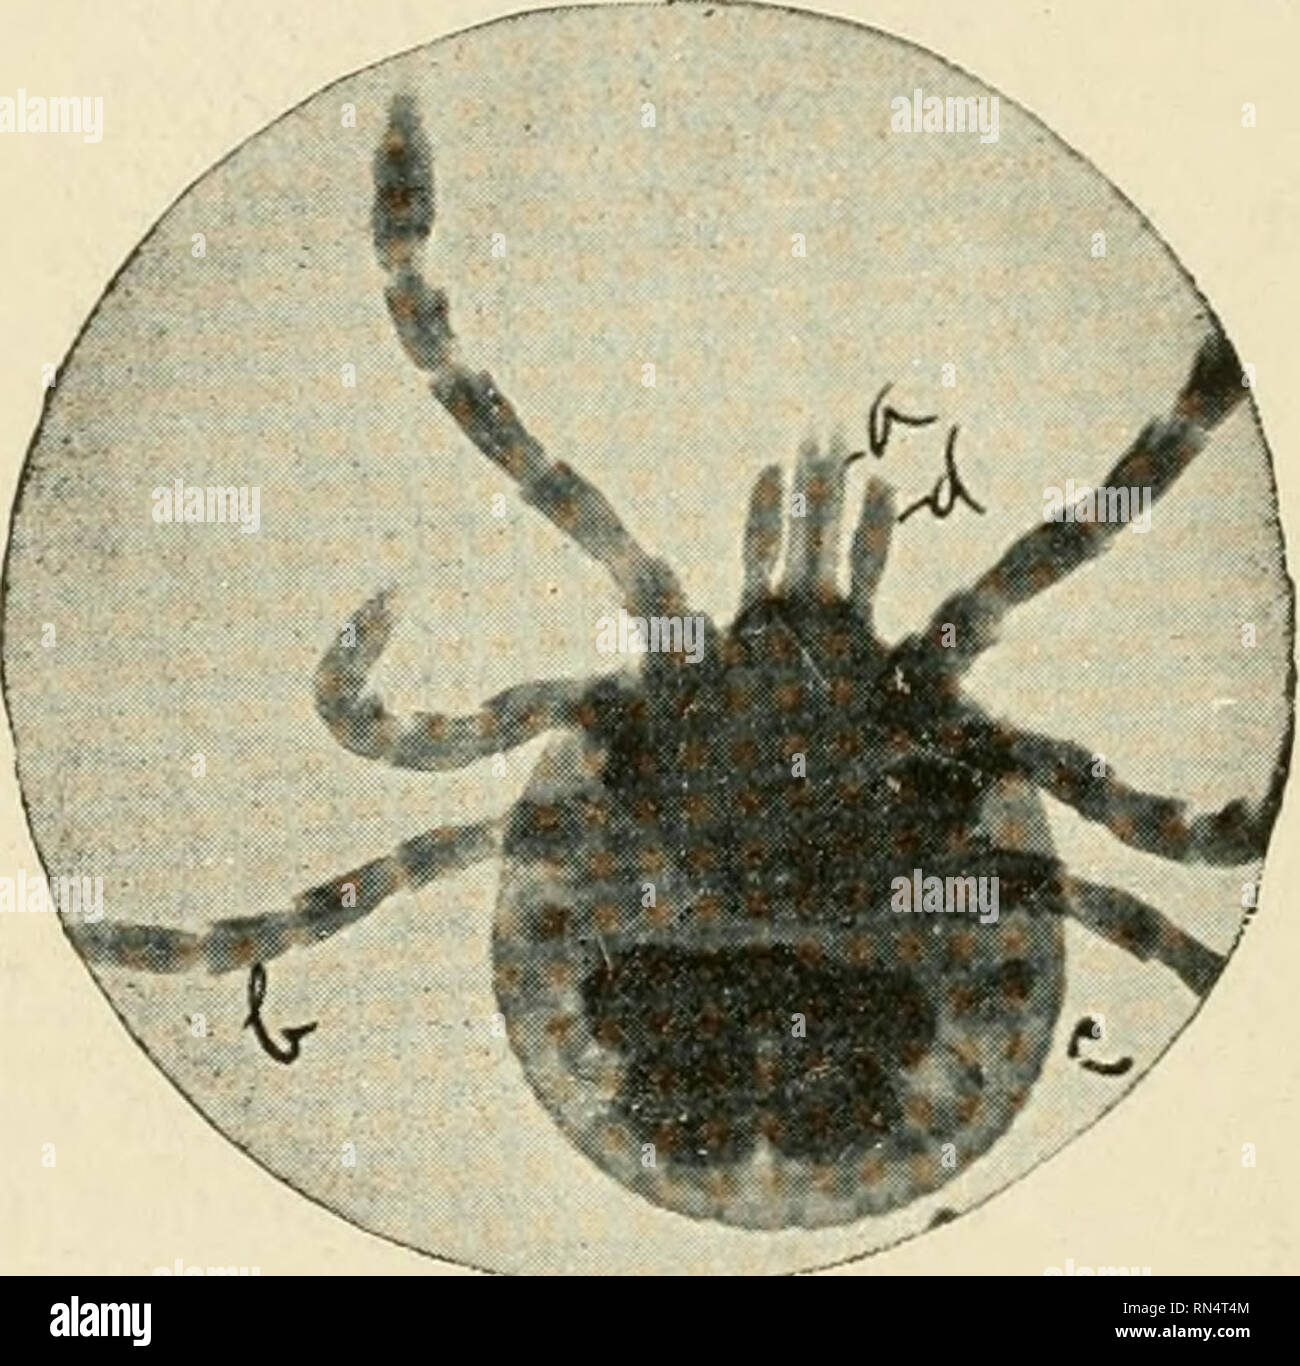 . Animal parasites and parasitic diseases. Domestic animals; Veterinary medicine. 70 PARASITOLOGY. Animals Infested.—Dog, horse, ox, etc. Description.—The engorged female is about the size of the fever tick, though the legs are longer and the head parts more prominent. The dorsal shield is large, somewhat elongated through the antero- posterior diameter, and is white in color. The hy- postome is provided with six rows of denticles. The. Fig. 21—Amblyomma Americanum Larva. Photomicrograph 1x2/3 inch. a, Mandibles. c, Body. b, Legs. d, Palpi. dorsal surface of the male presents a large, white do Stock Photo